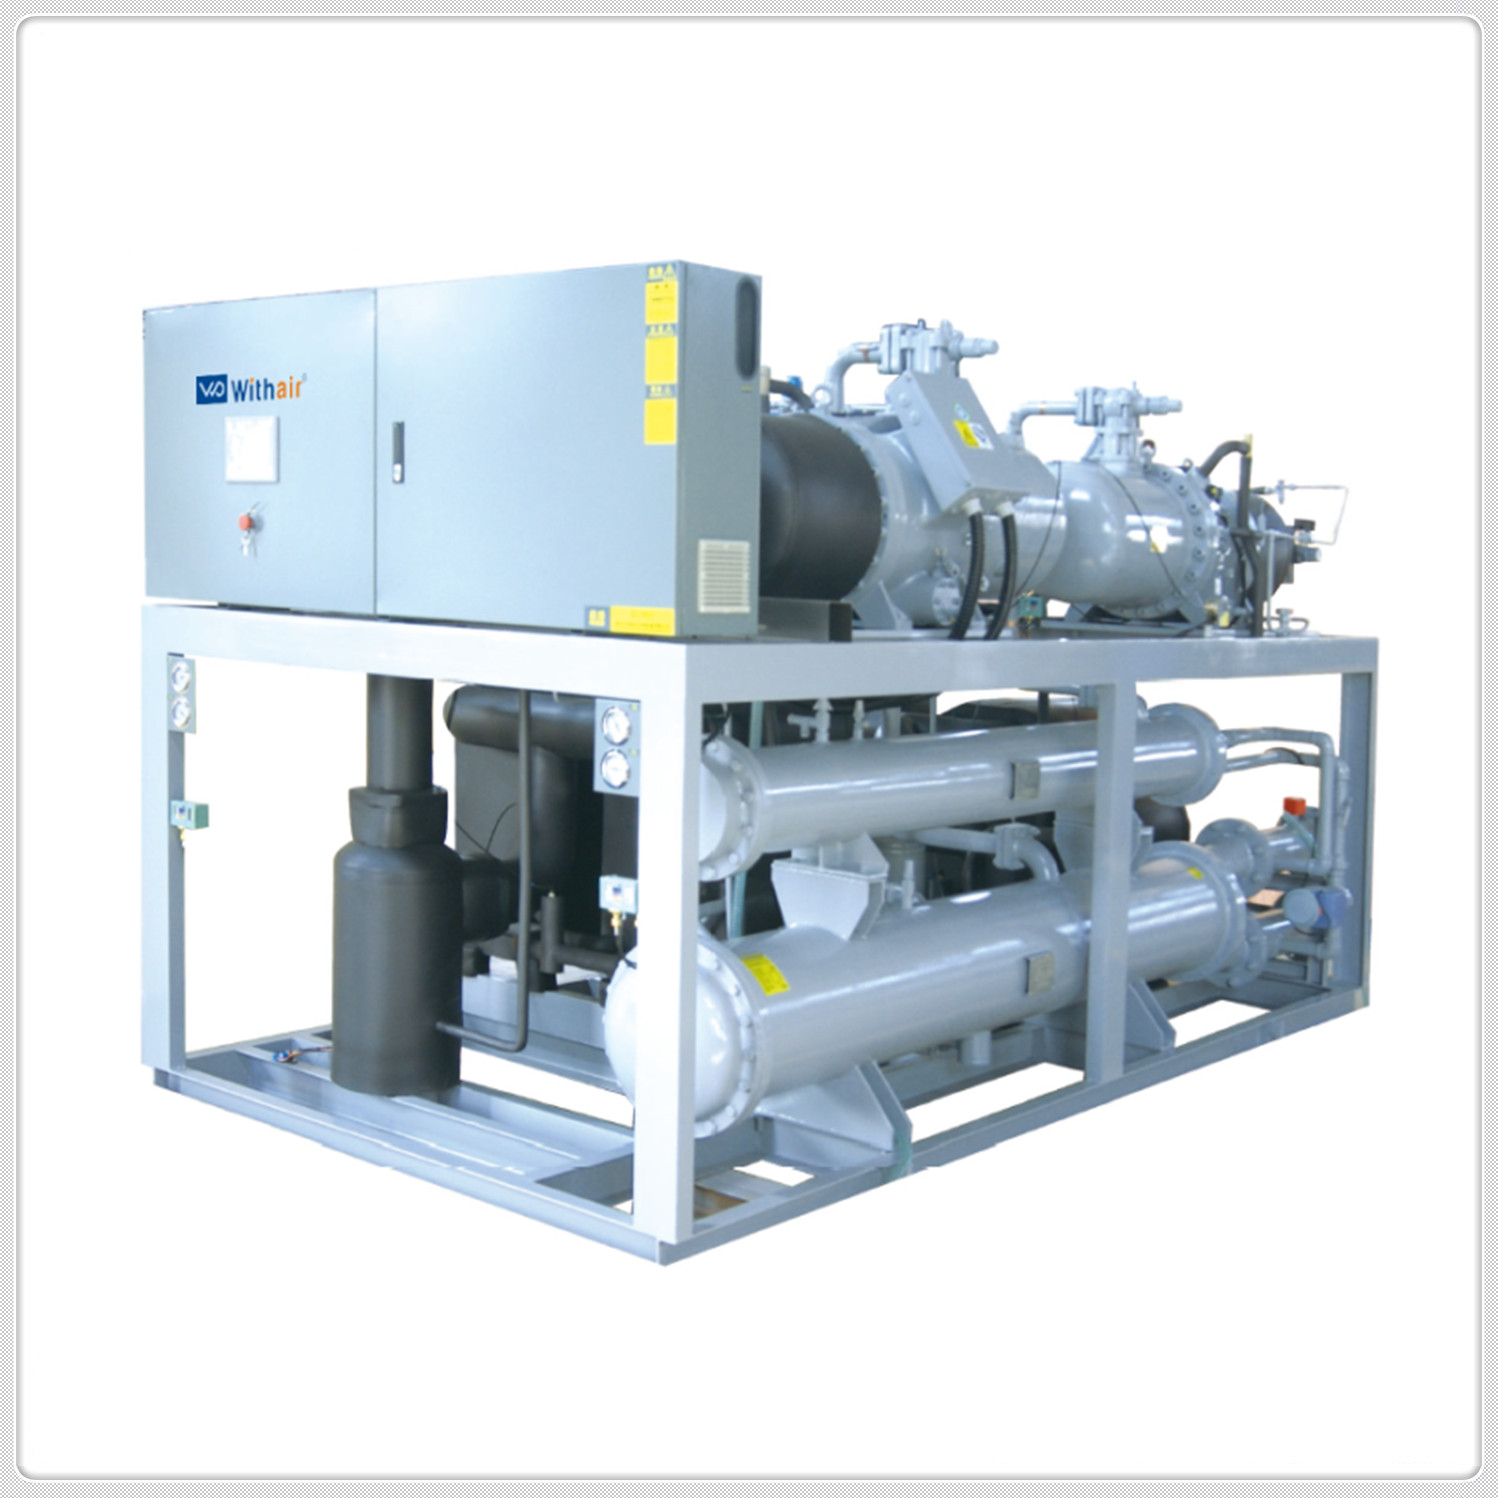 Withair® Chilled Water Systems